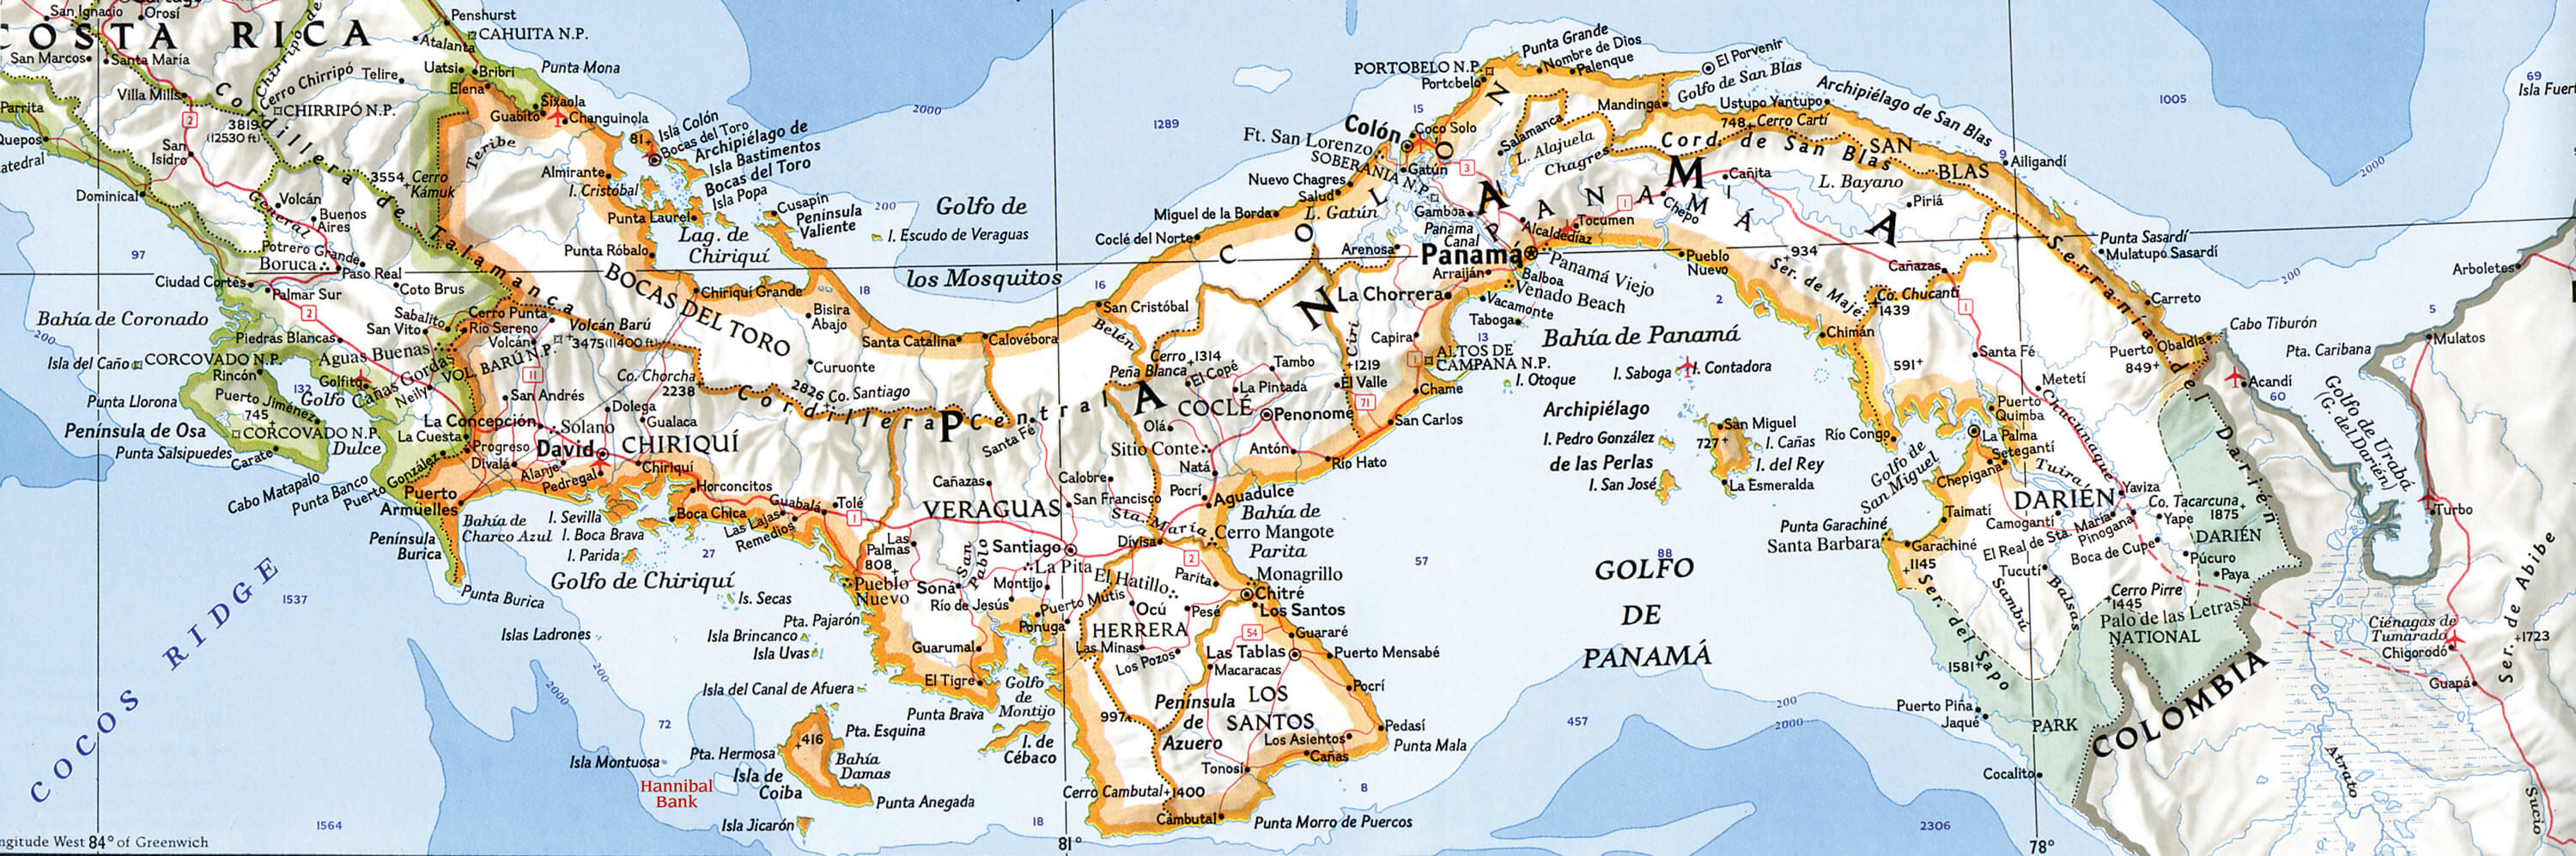 physical map of panama towns